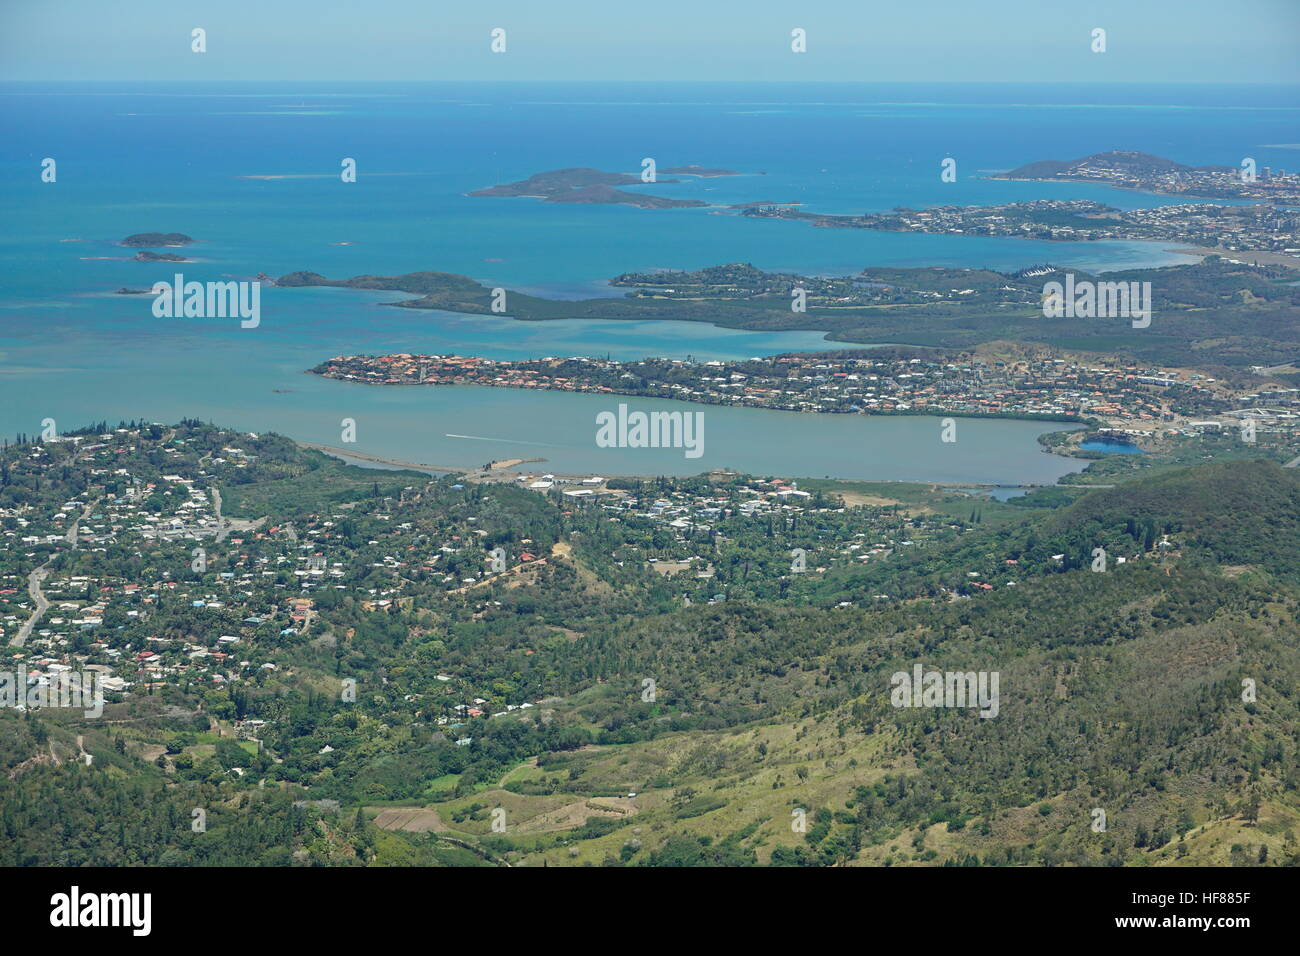 Aerial view, Boulary bay, islands and peninsula of Tina, Noumea, southwest coast of Grande Terre, New Caledonia, south Pacific ocean Stock Photo